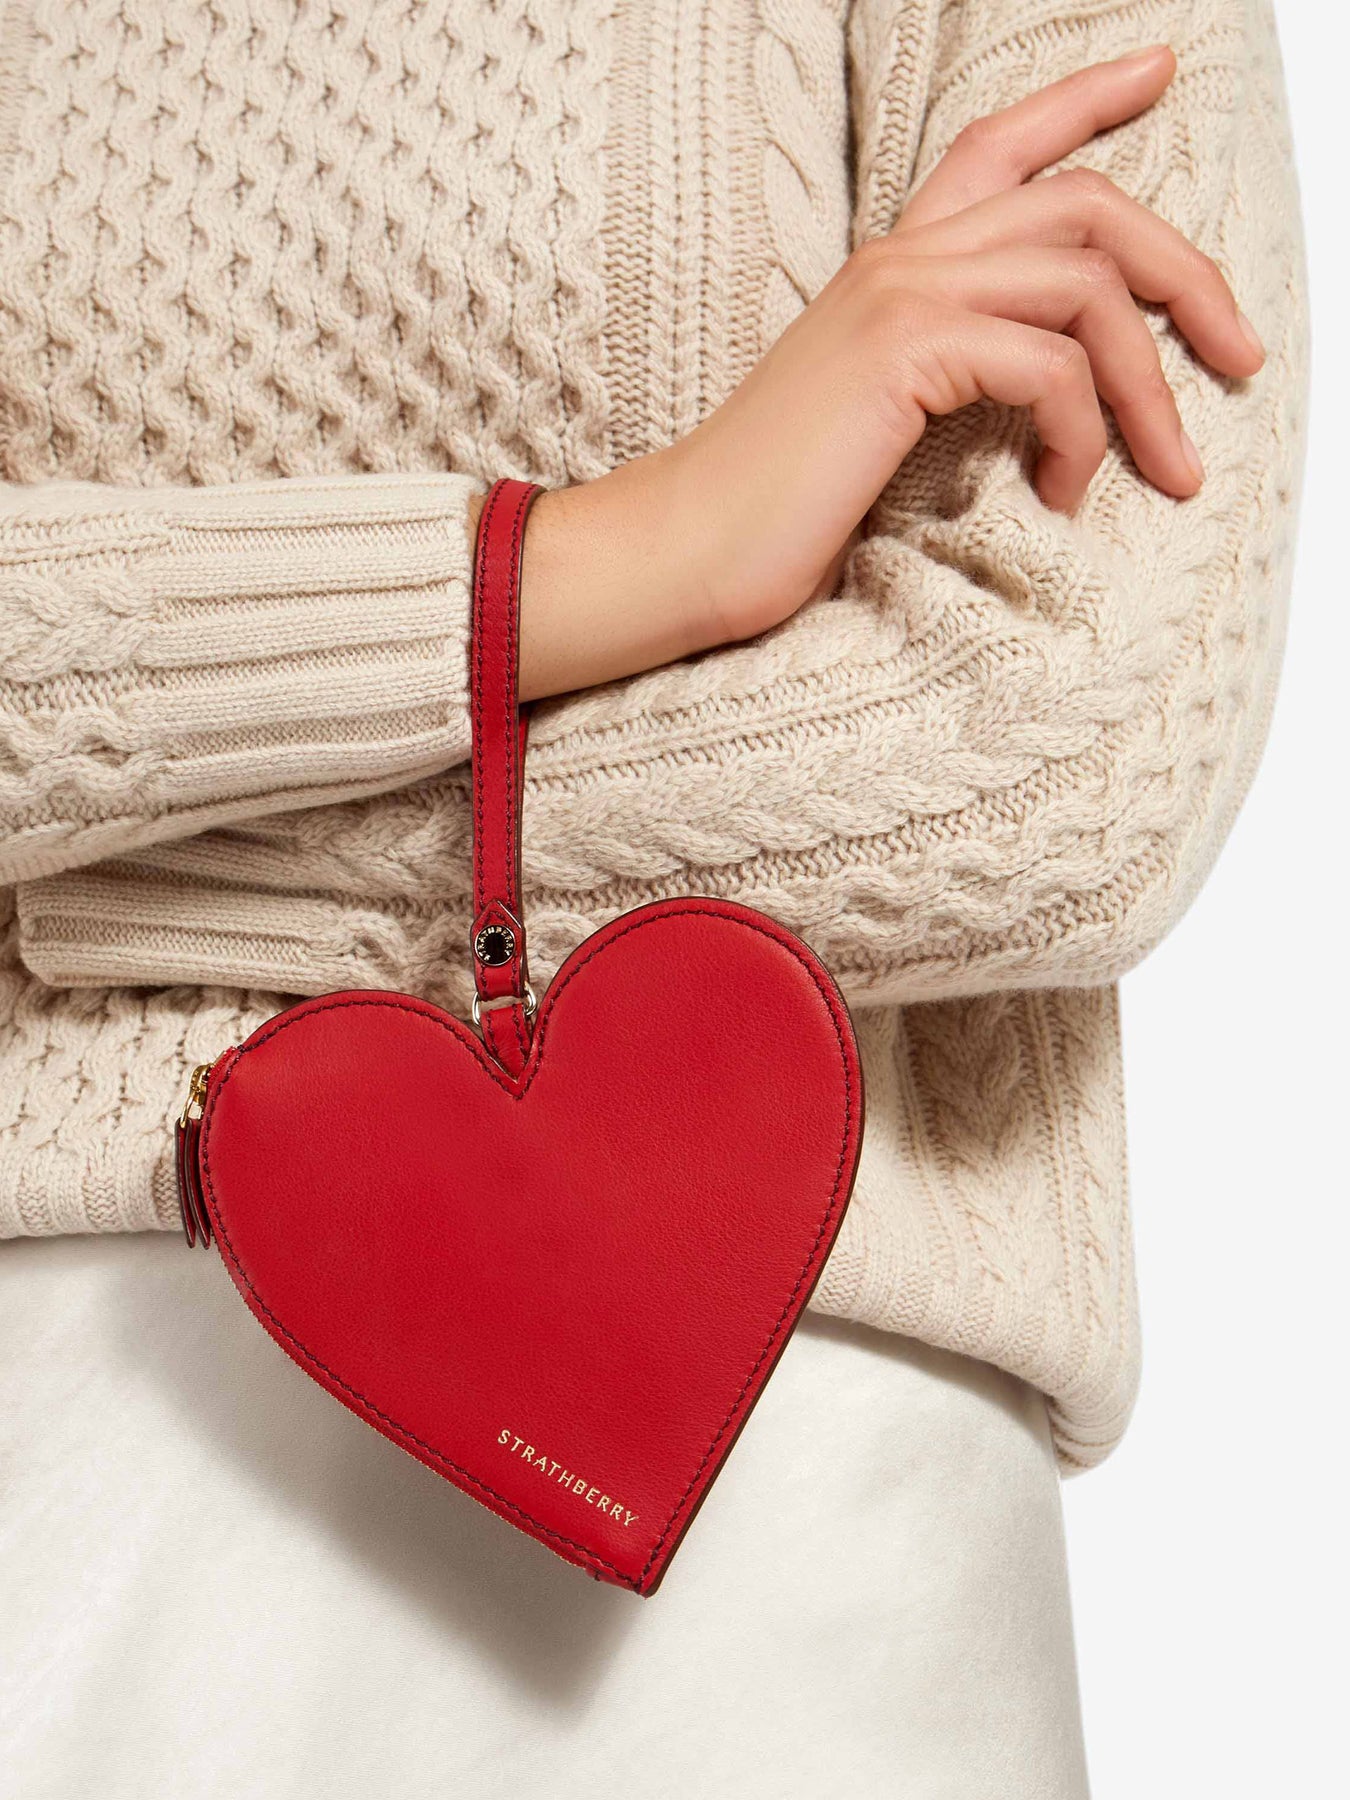 Strathberry - Heart Pouch - Red